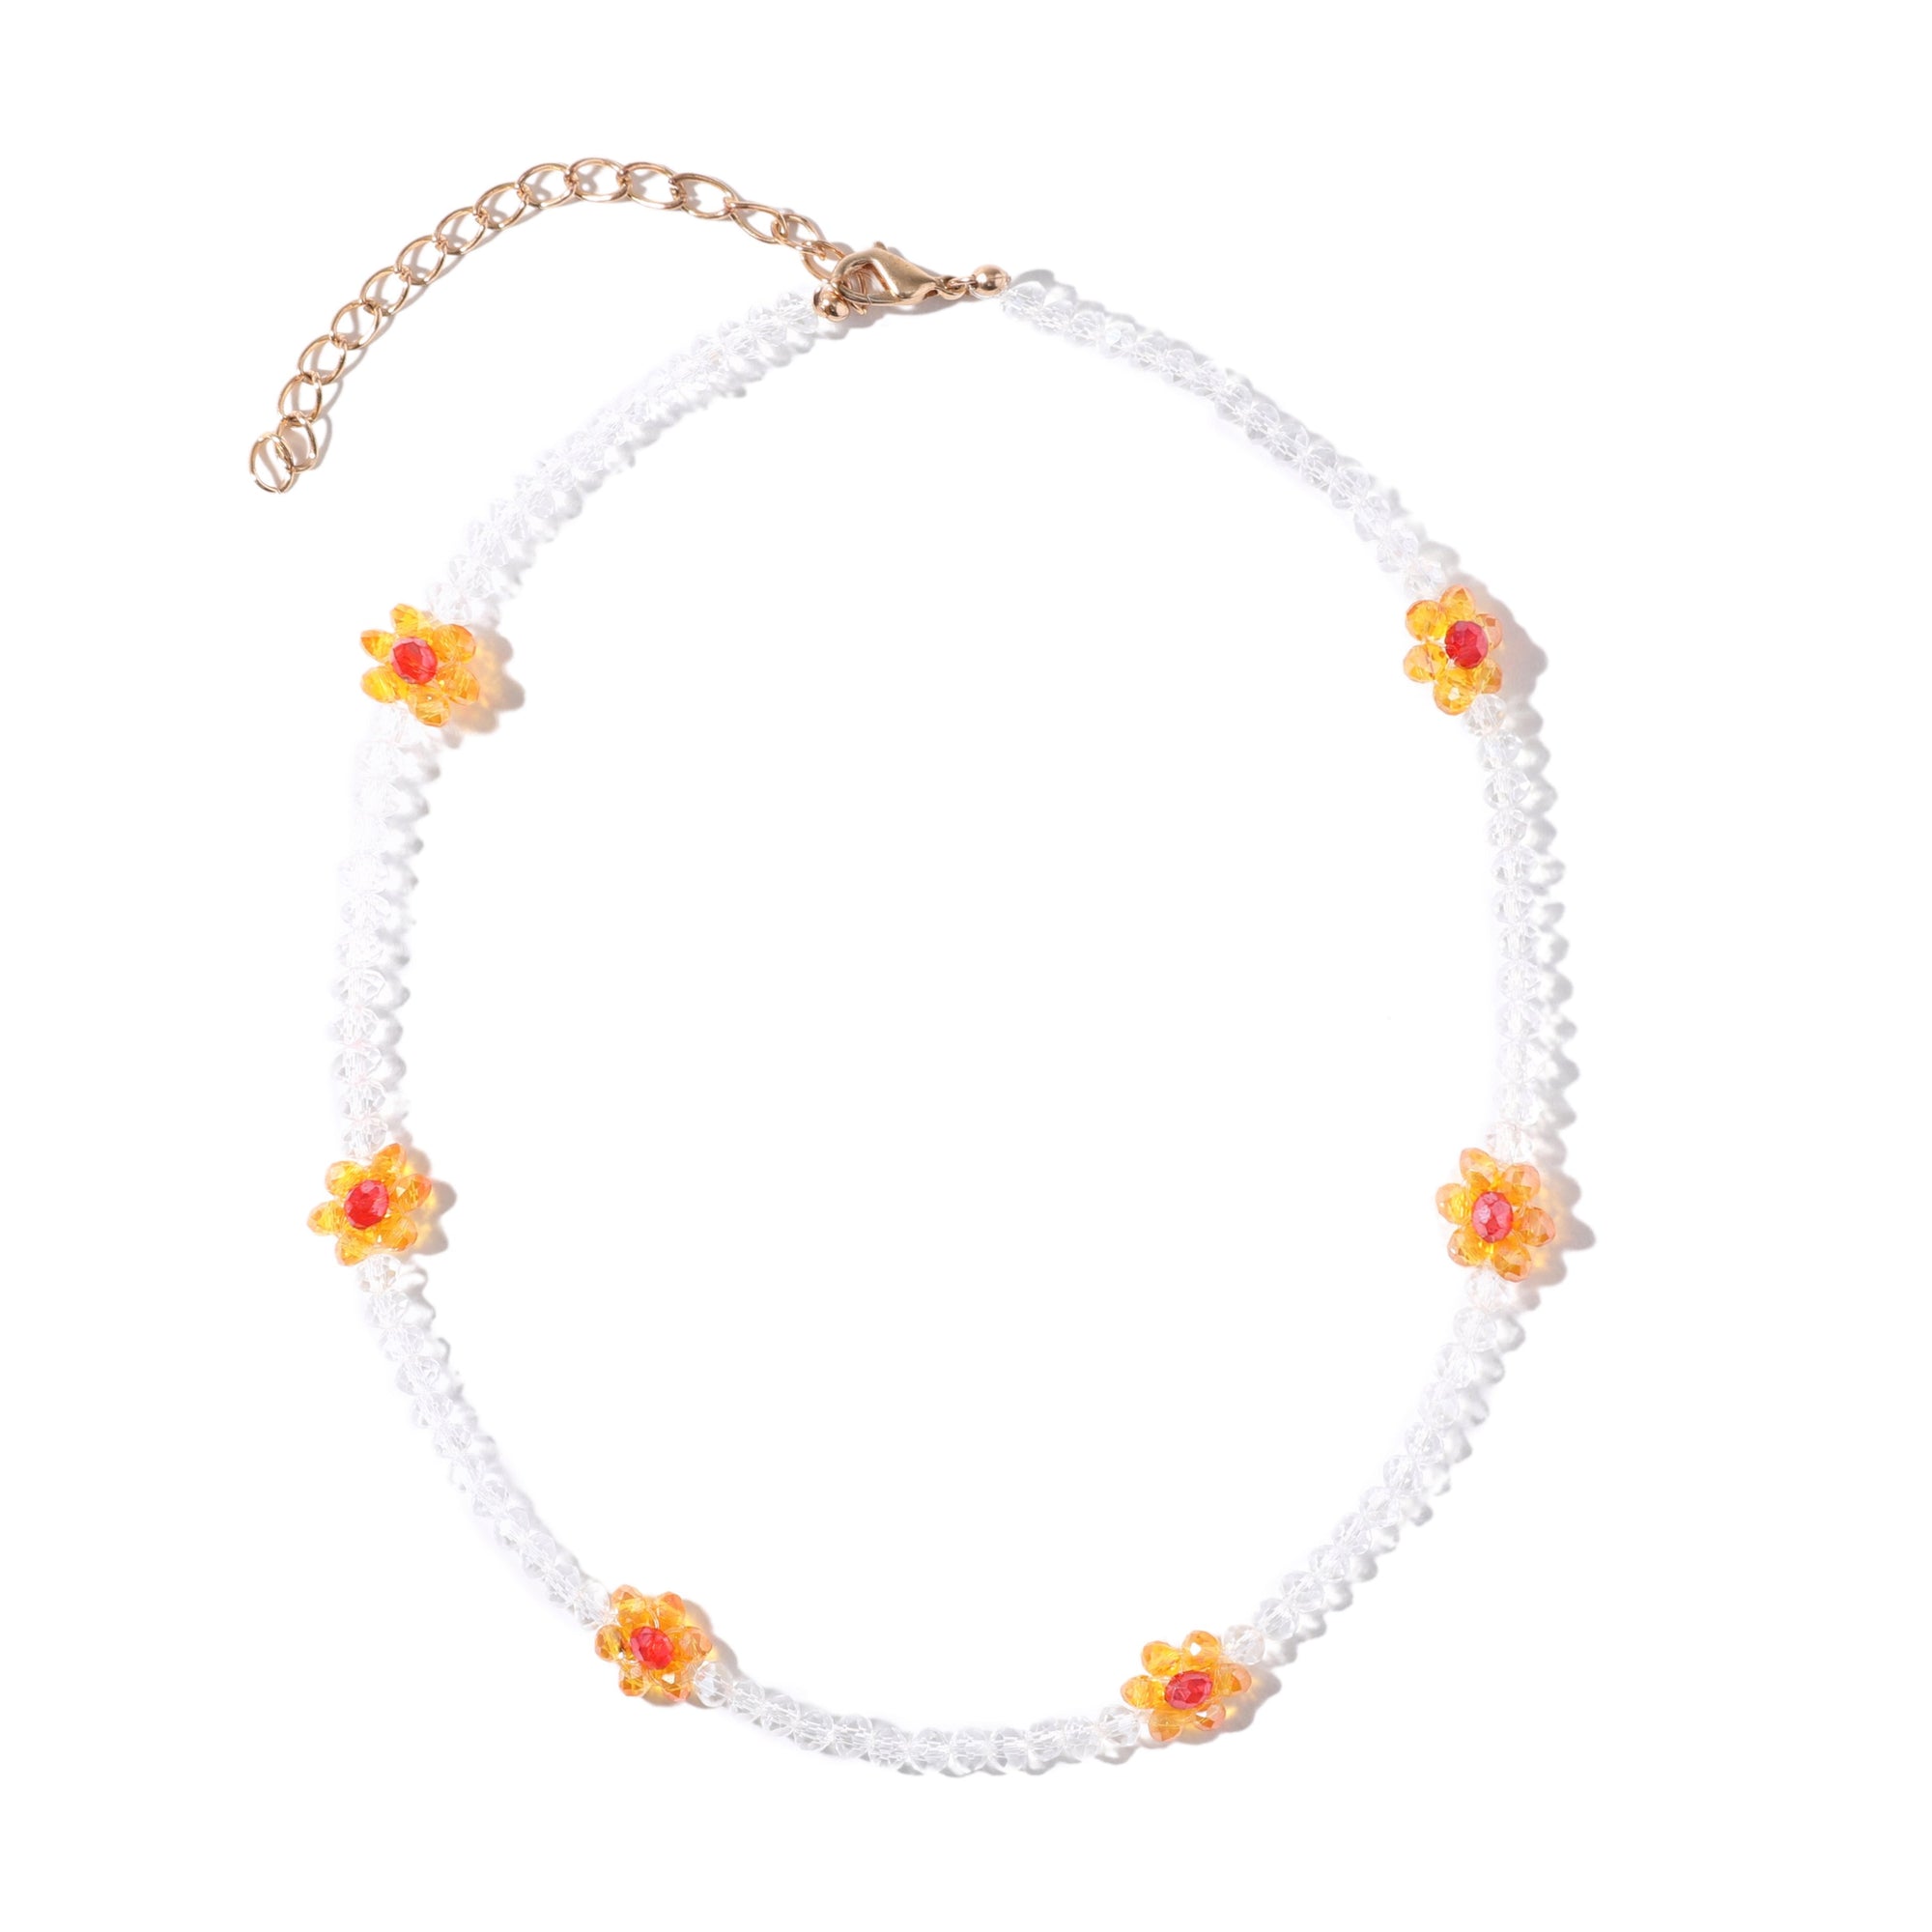 Penny Lane Necklace in Begonia